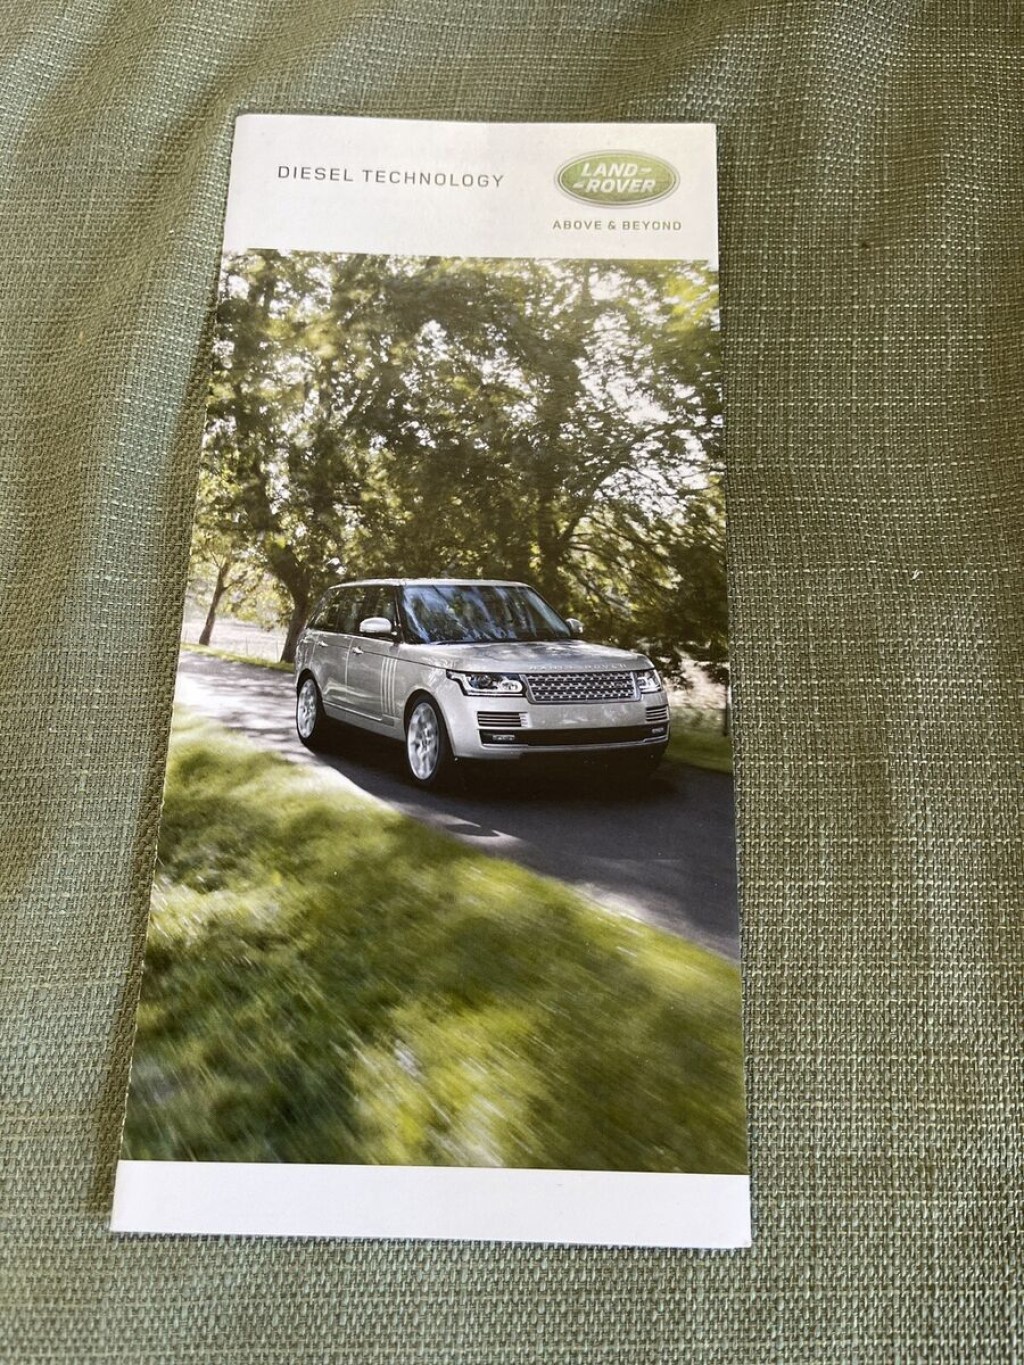 Picture of: Land Rover Range Rover Sport Owner’s Manual